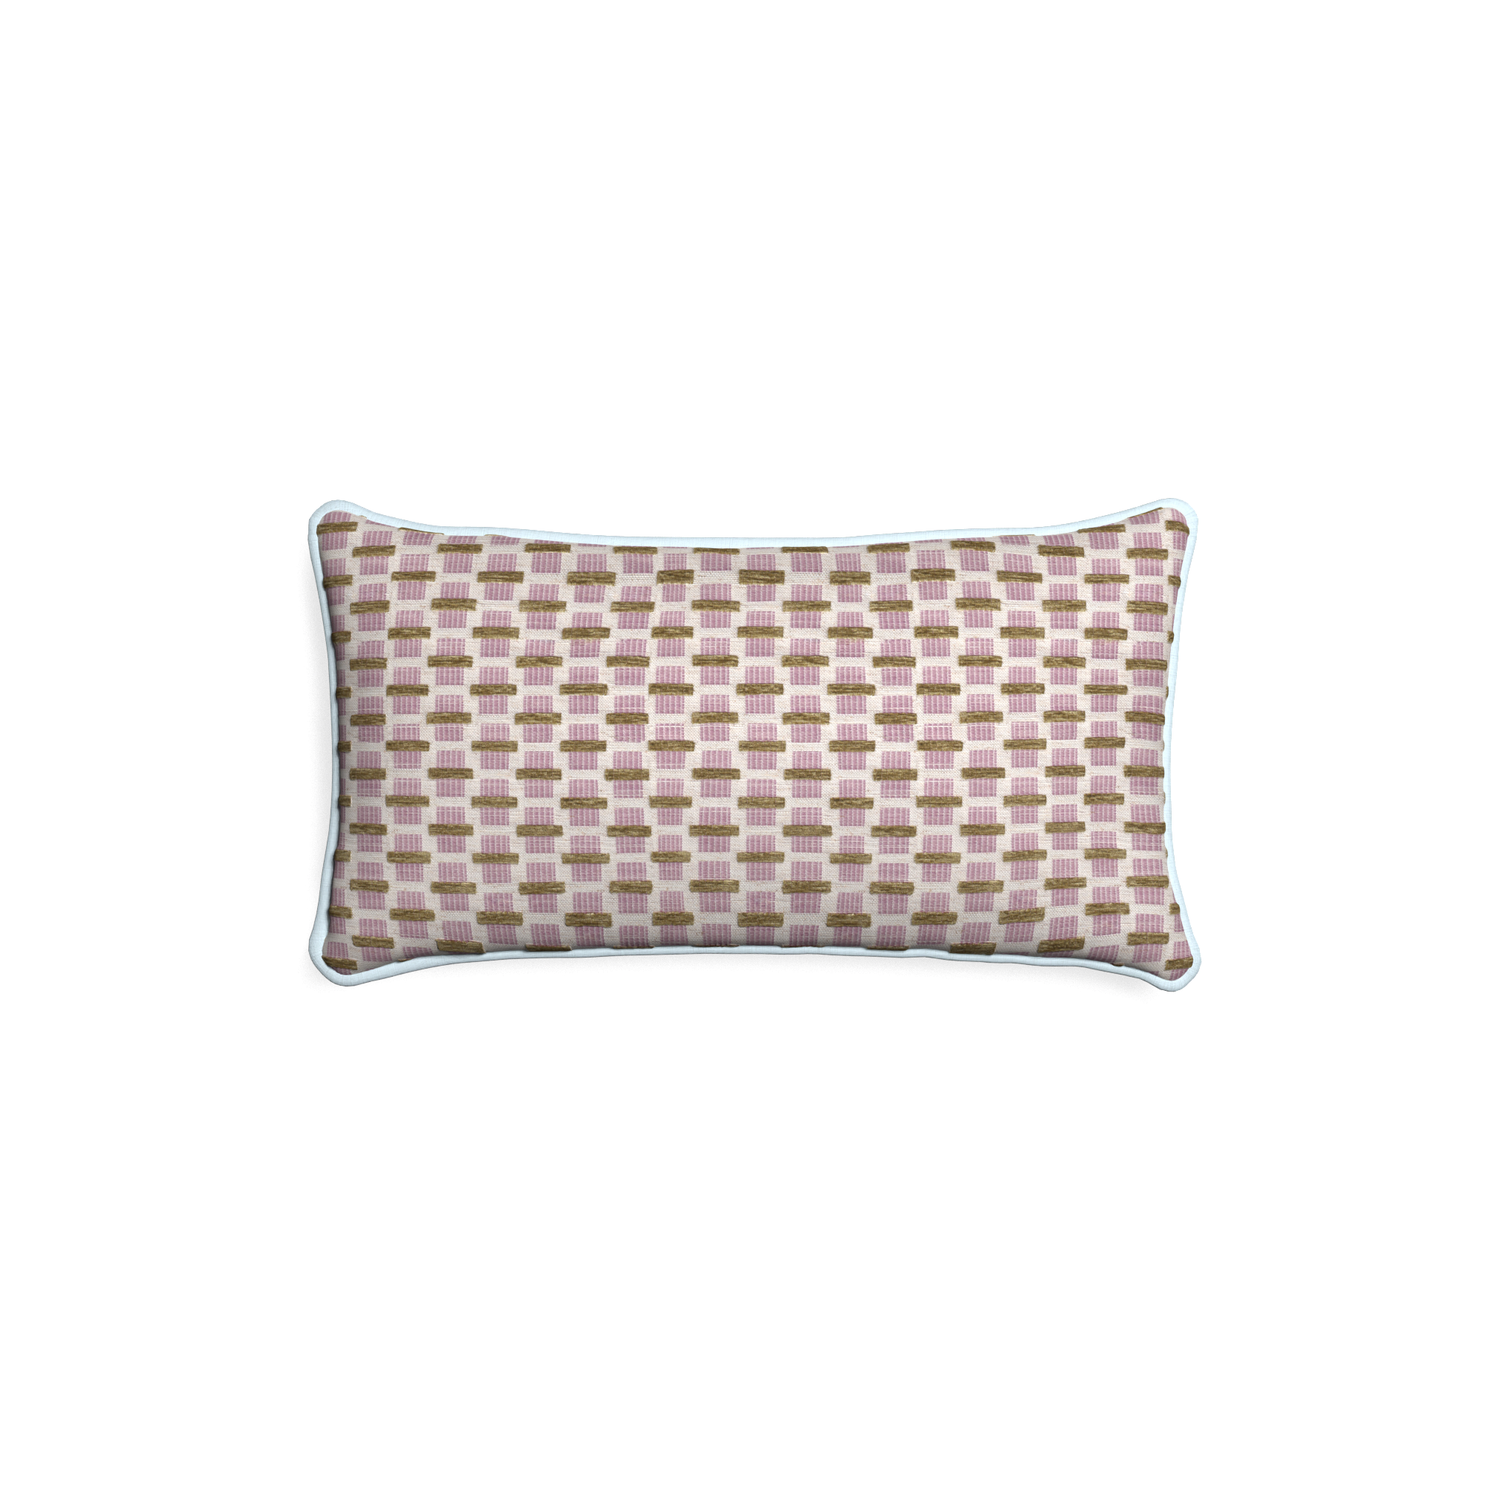 Petite-lumbar willow orchid custom pink geometric chenillepillow with powder piping on white background